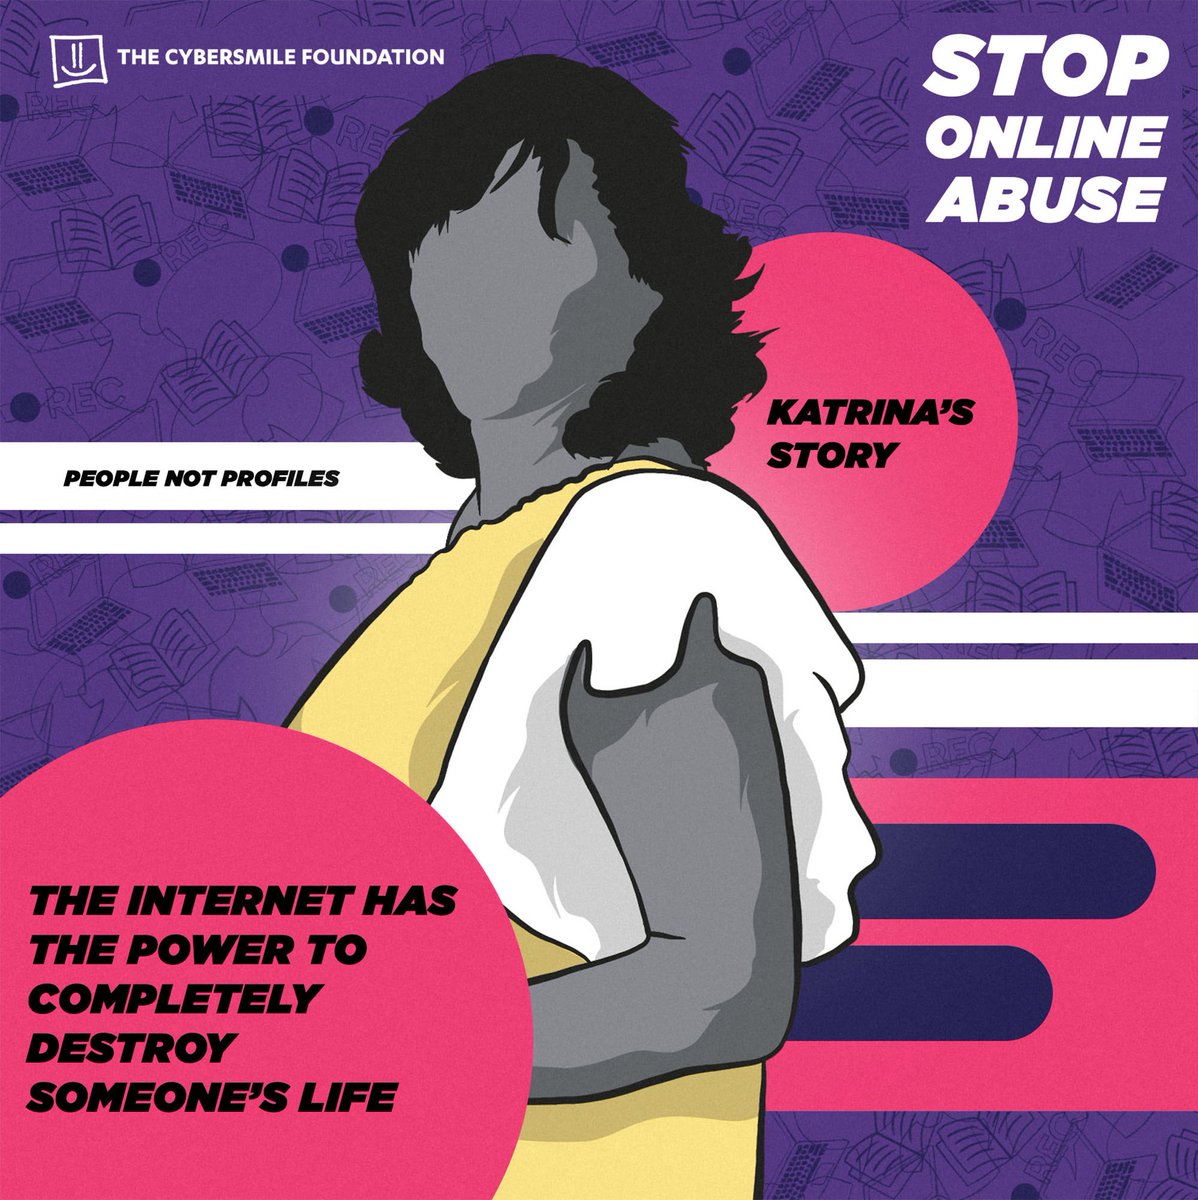 The internet can undoubtedly be a force for good, but it also has the power to completely destroy lives.Online abuse comes in many forms - it isn’t just targeting people with abusive language on social media.